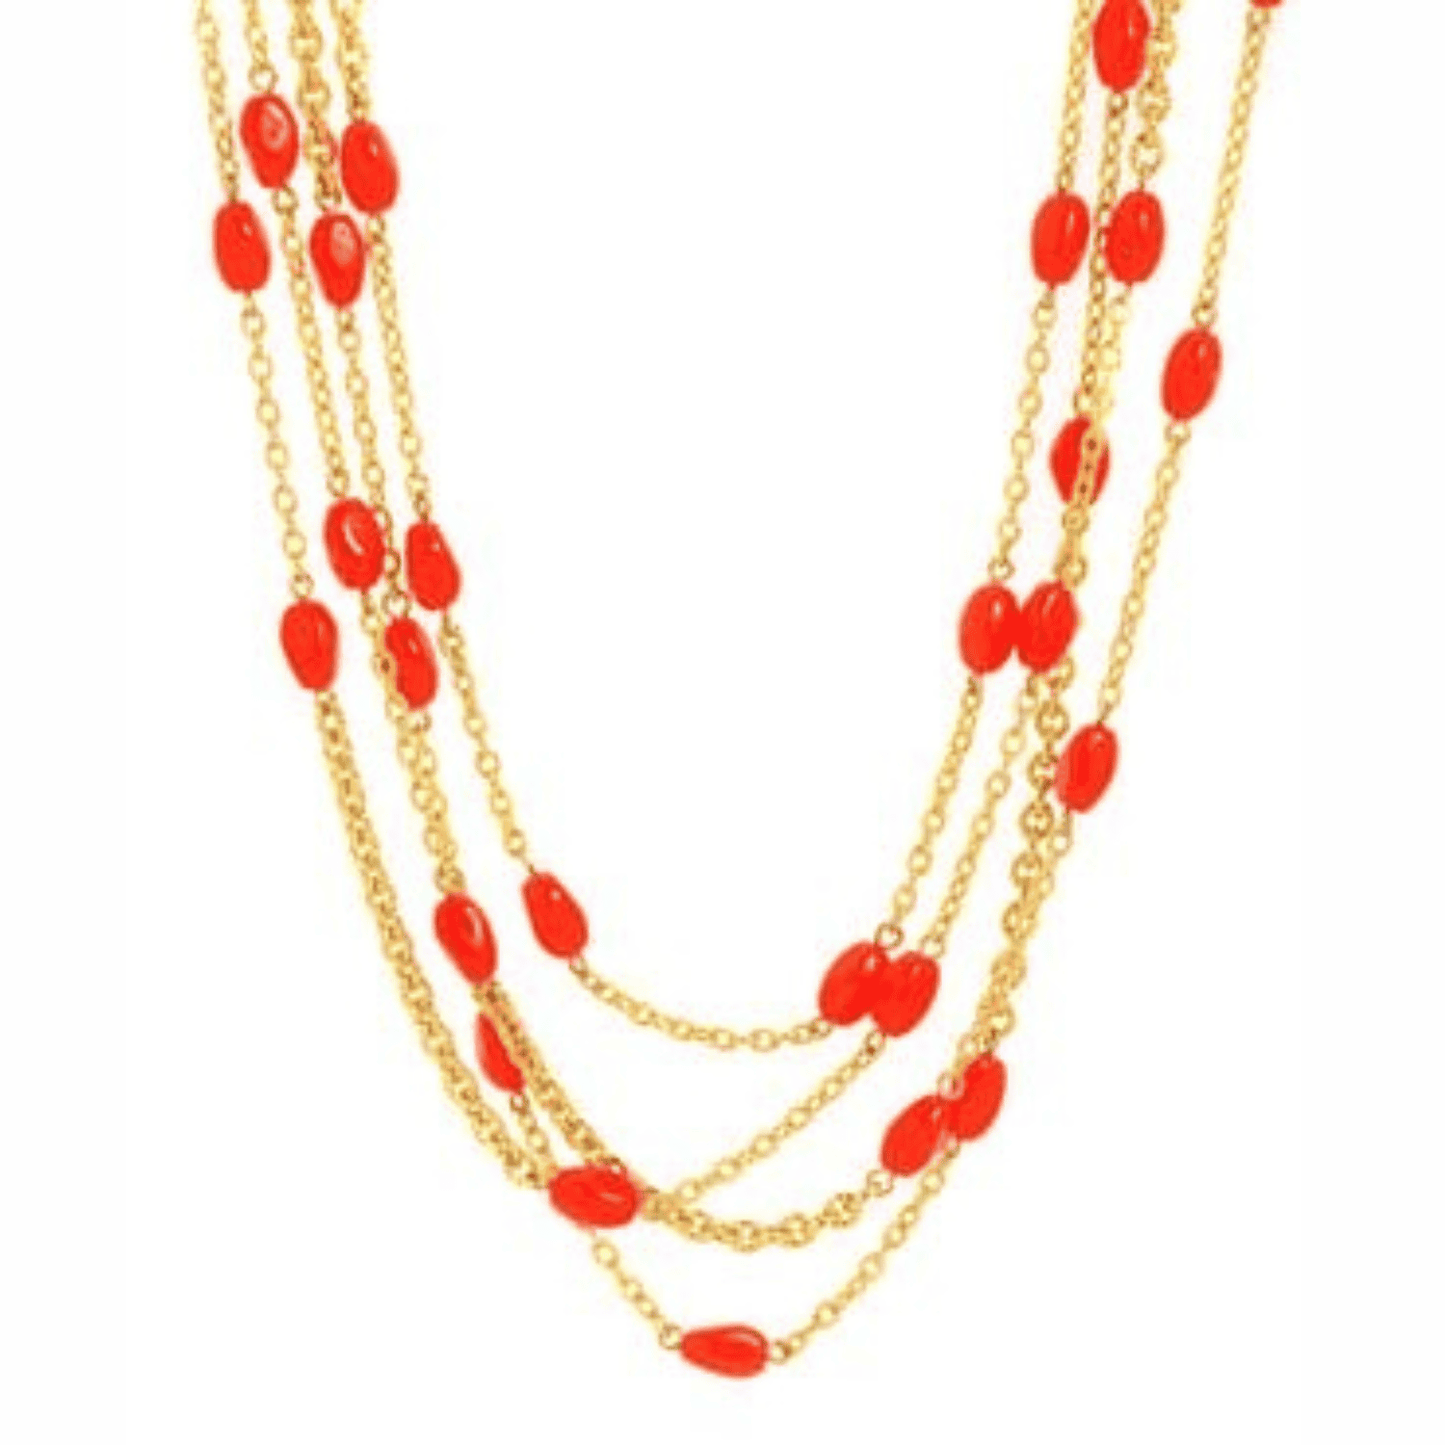 Zeal Necklace